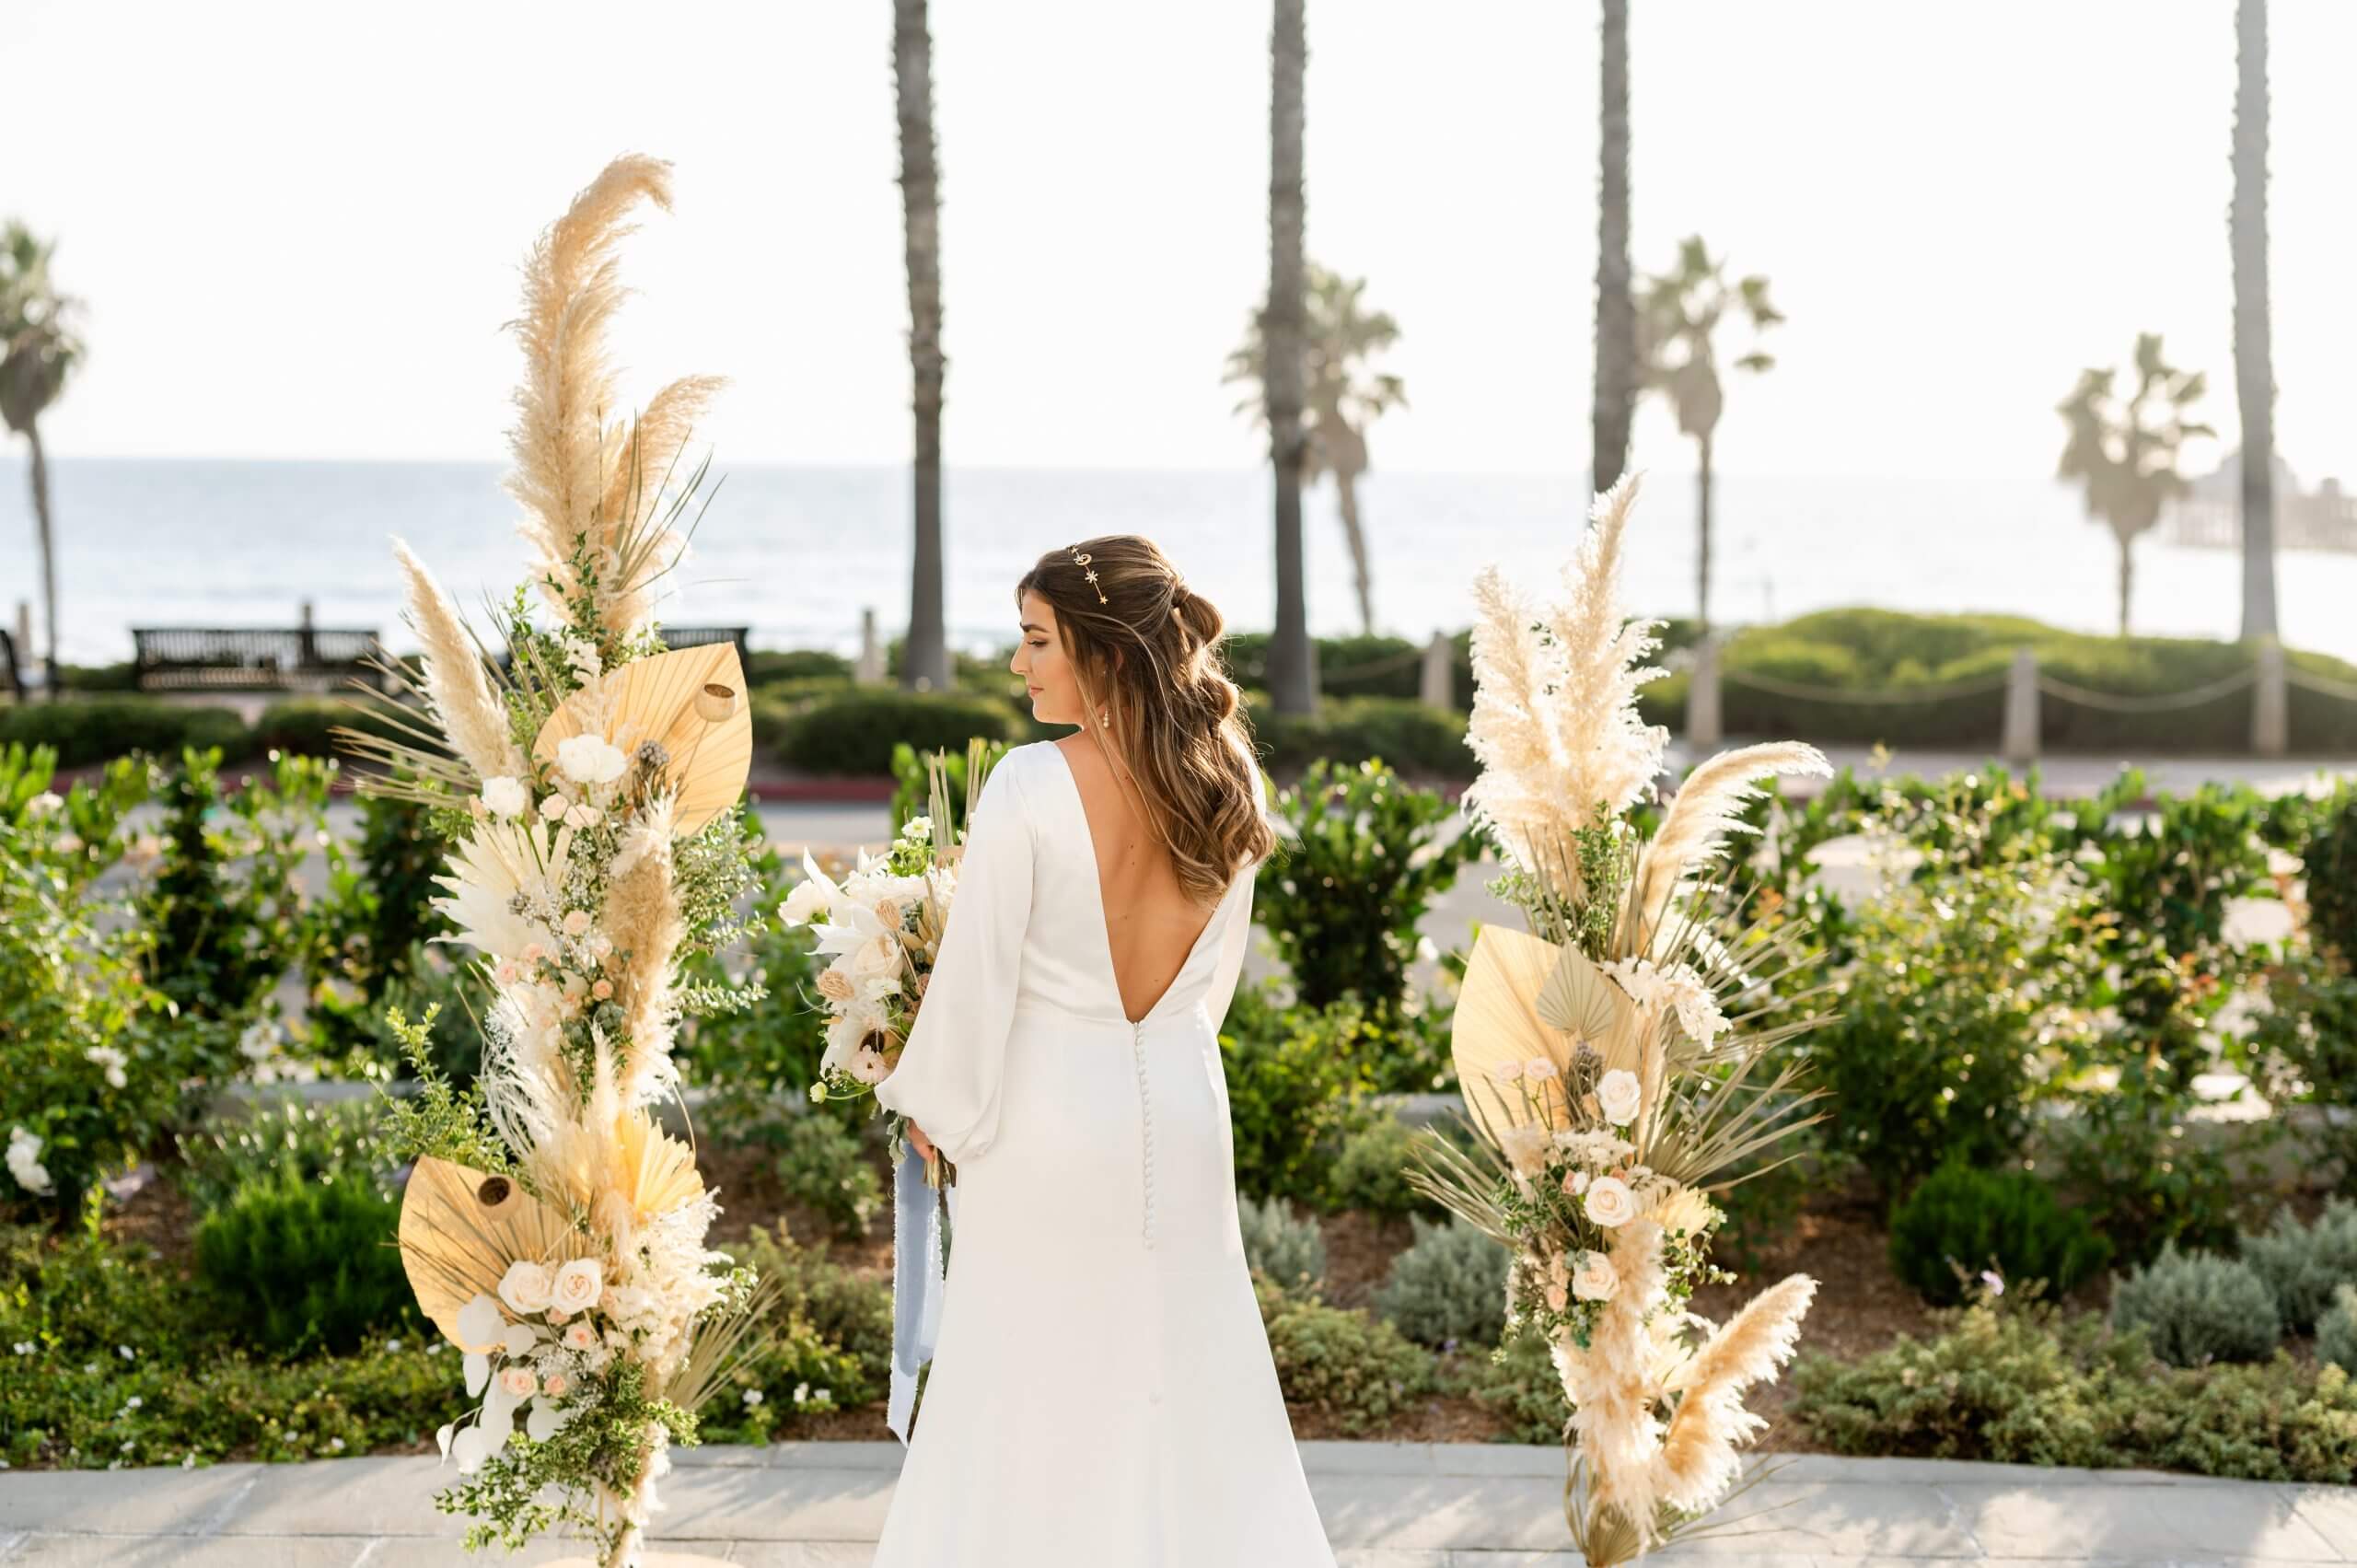 The bride holding a white bouquet with the sea as a backdrop